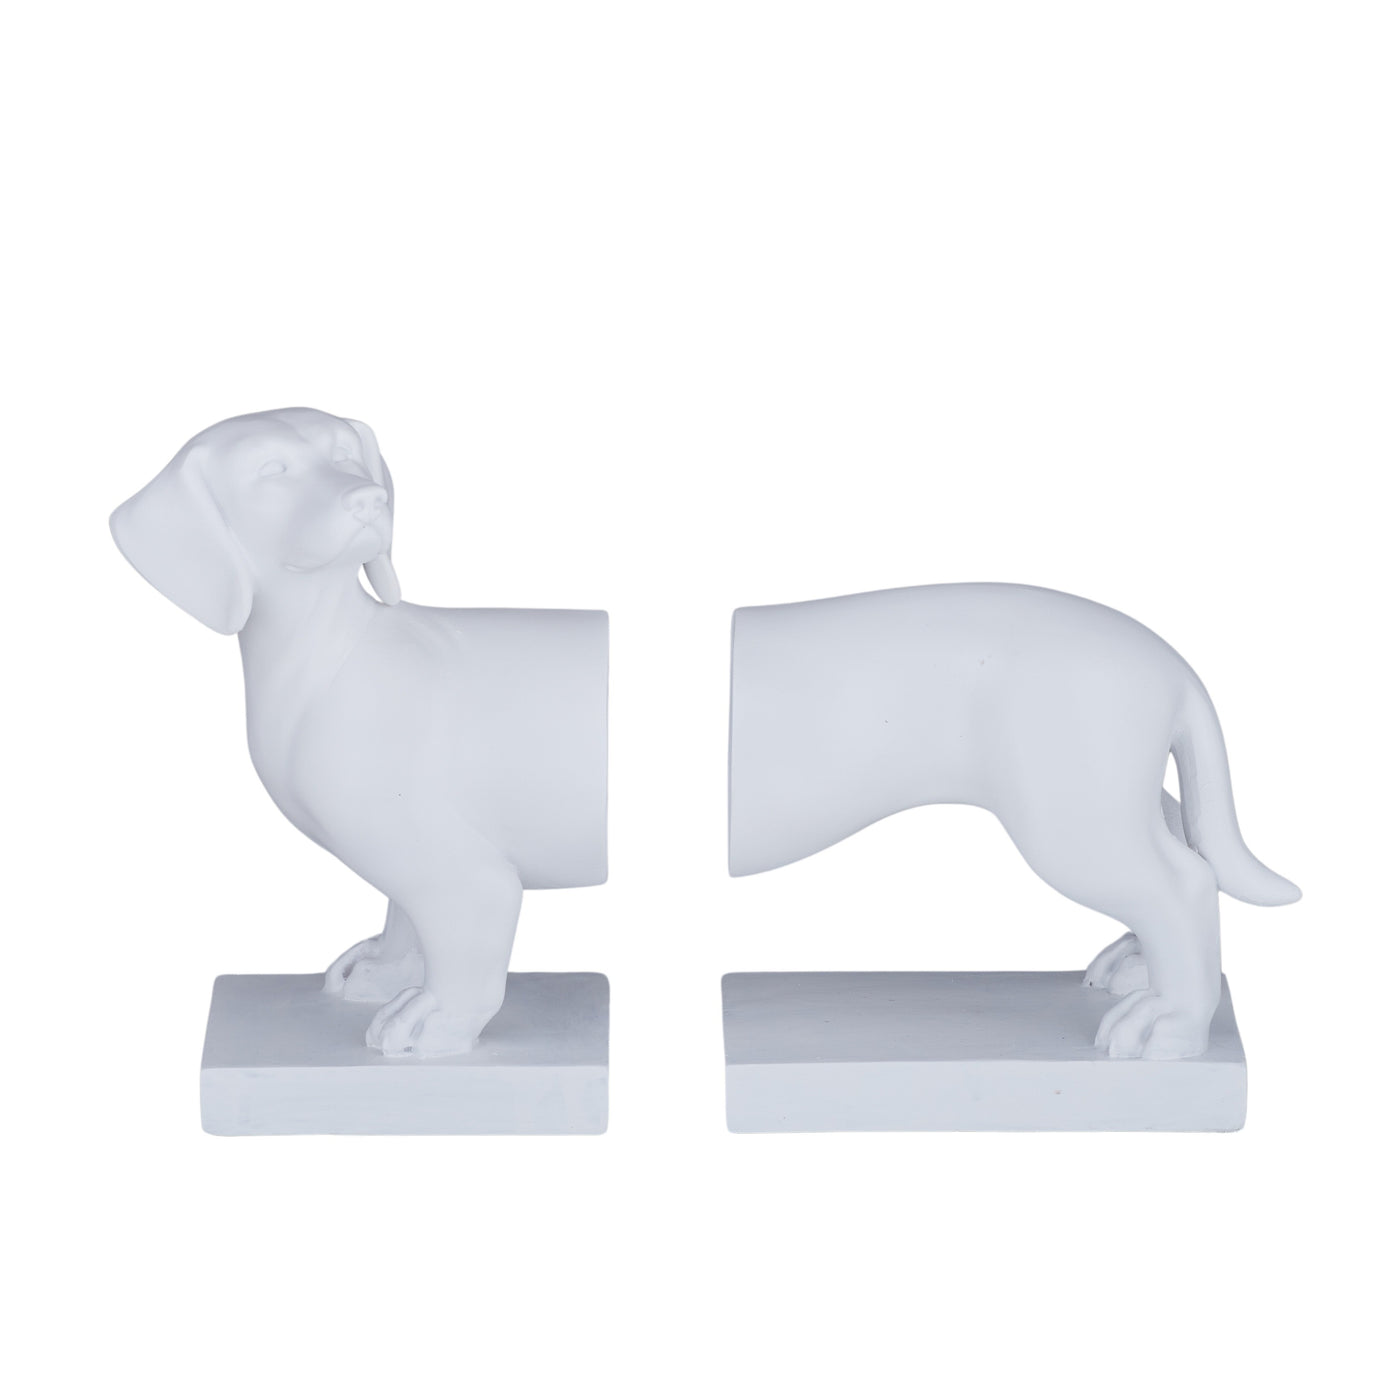 Woof Woof Set of 2 Bookends in White